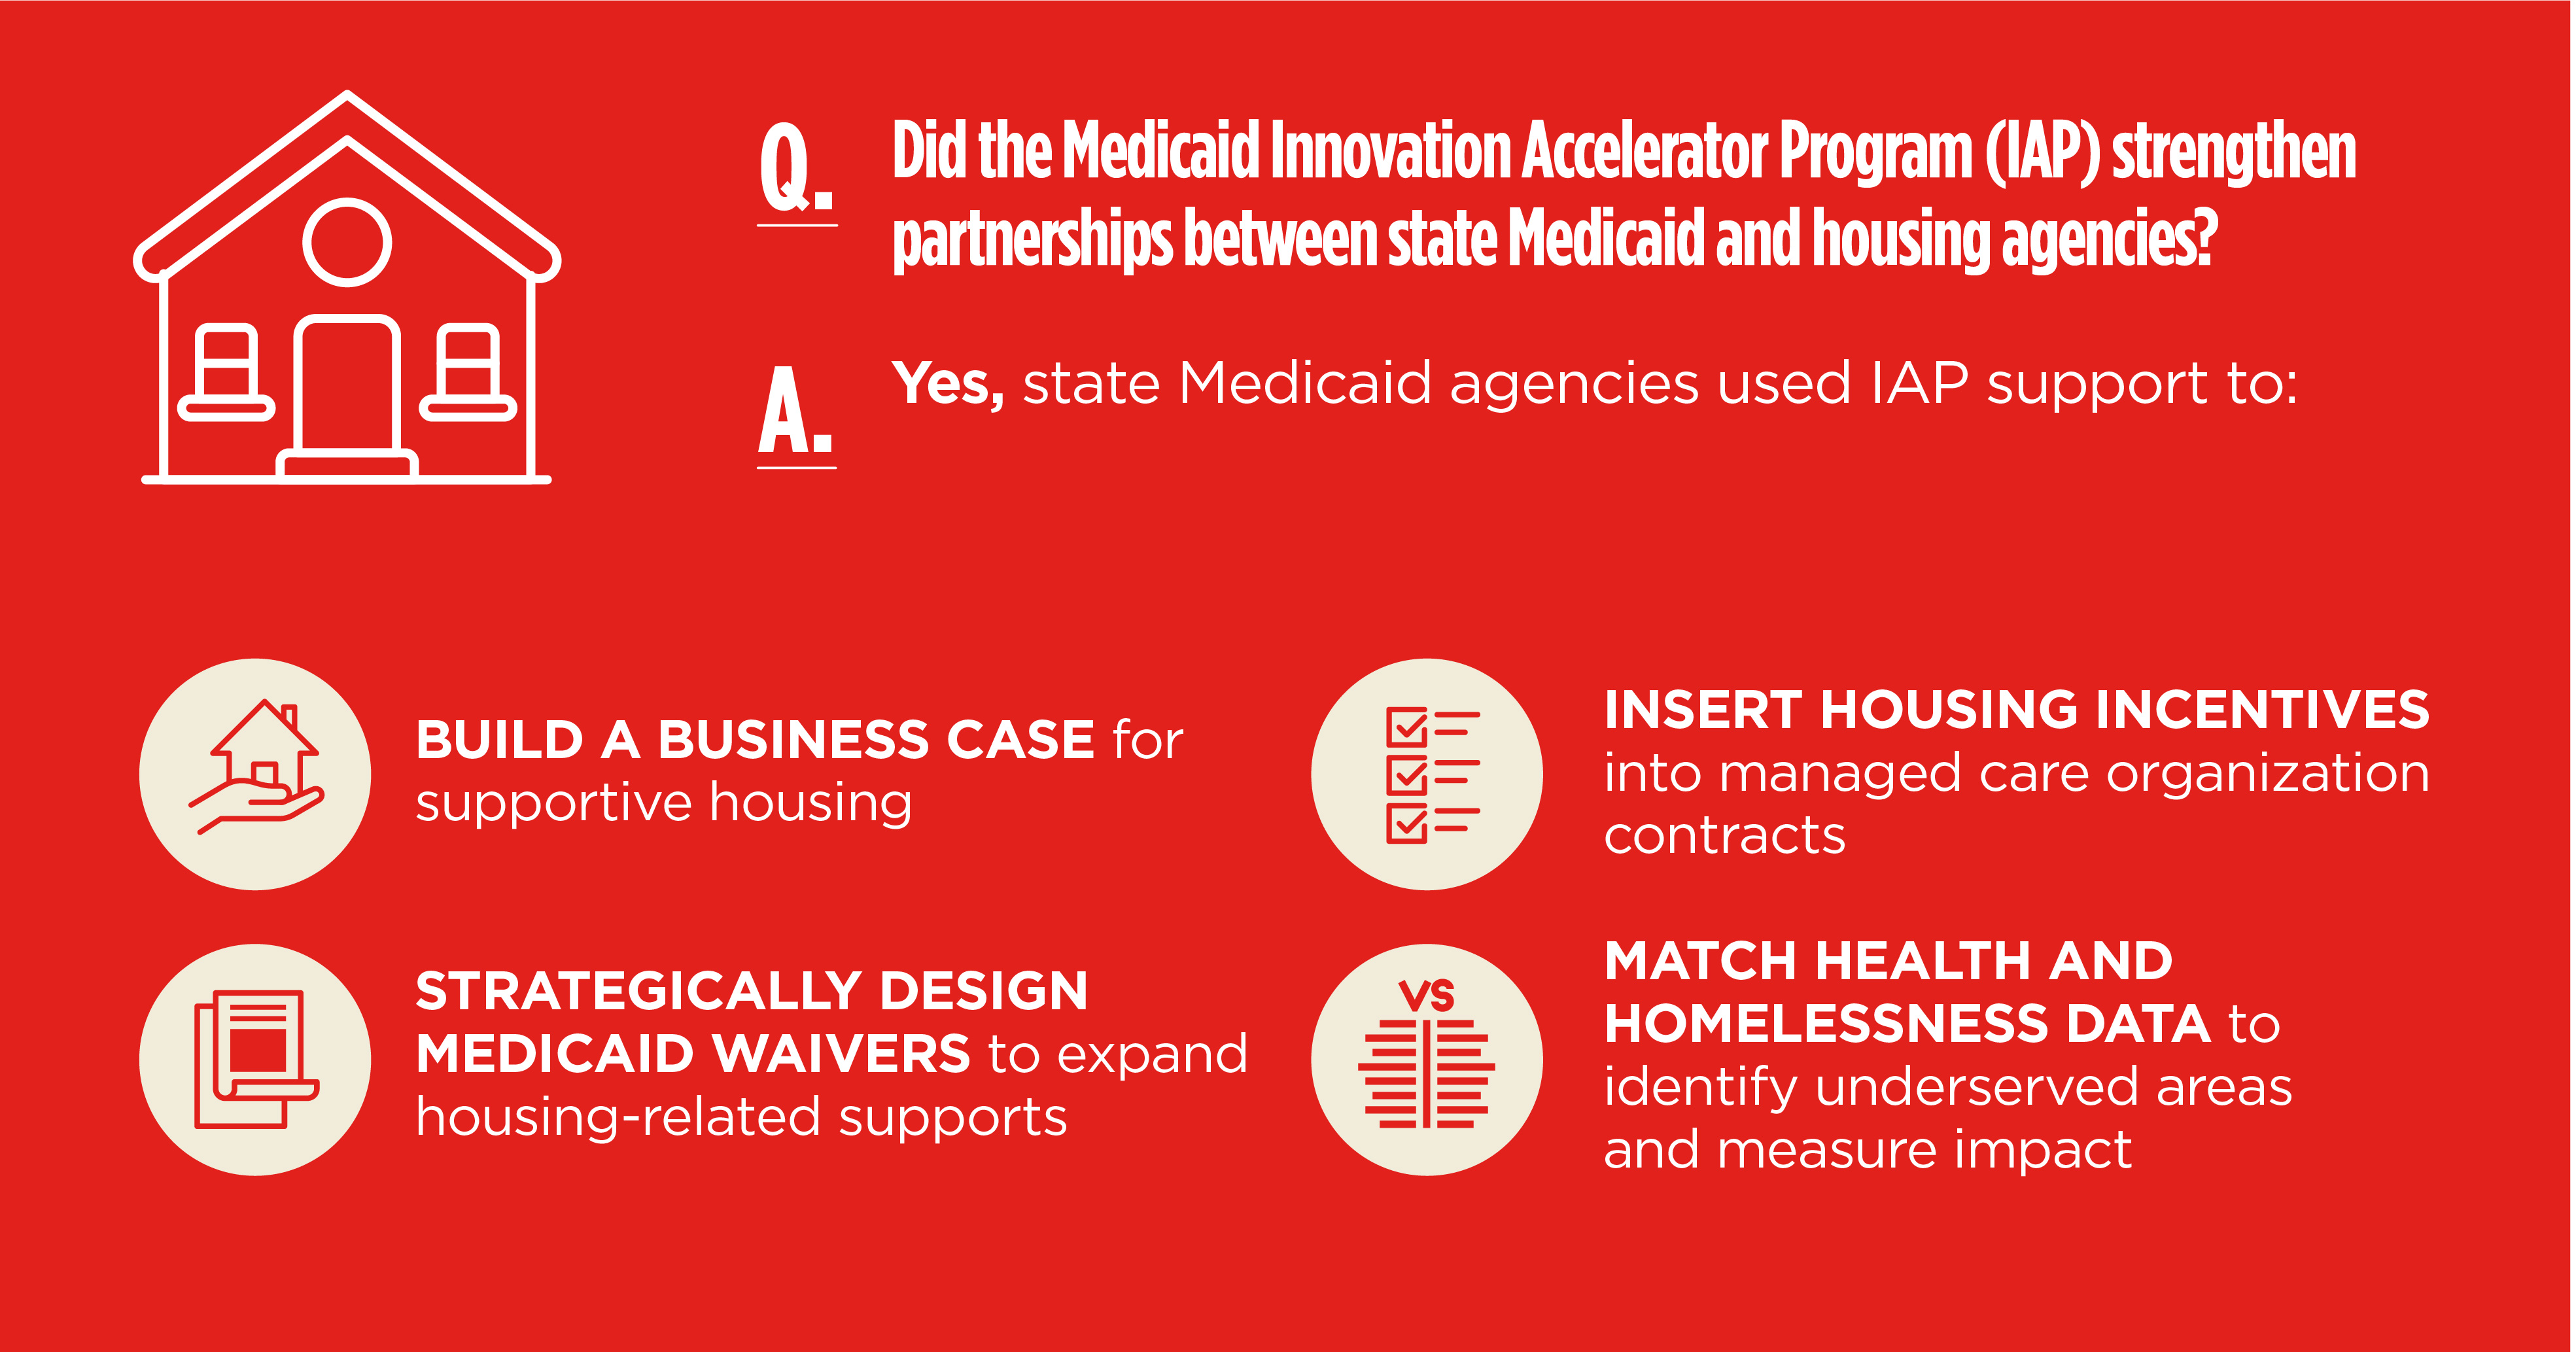 Policy_medicaid_innovation_accelerator_IAP